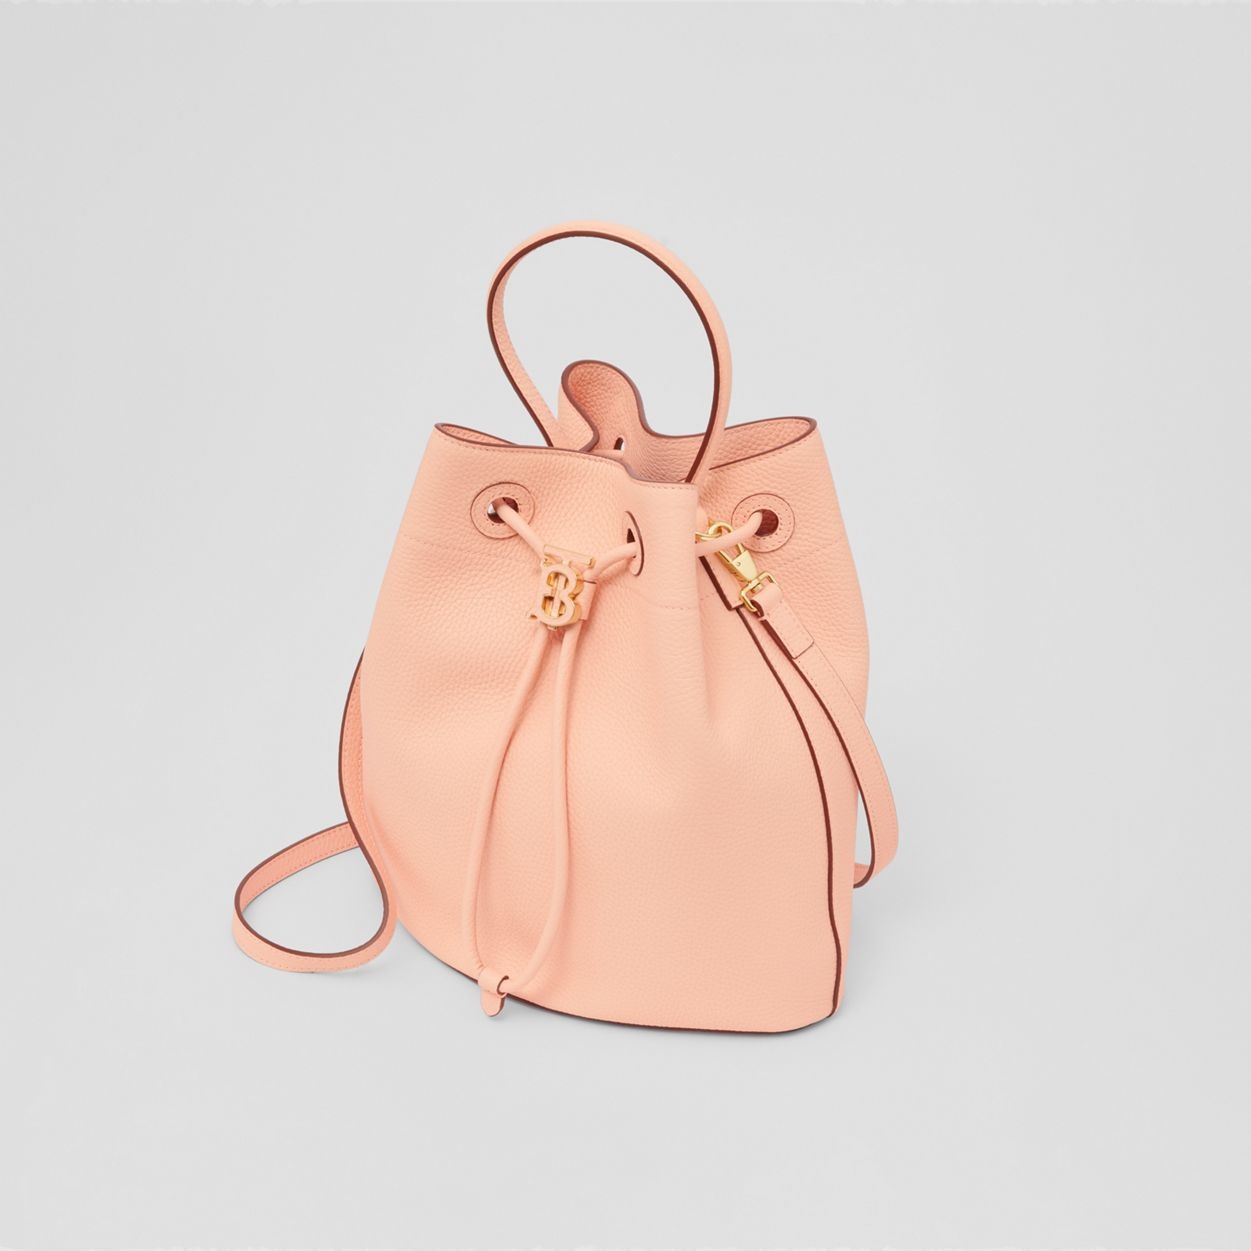 Burberry The Small Leather Bucket Bag in Pink